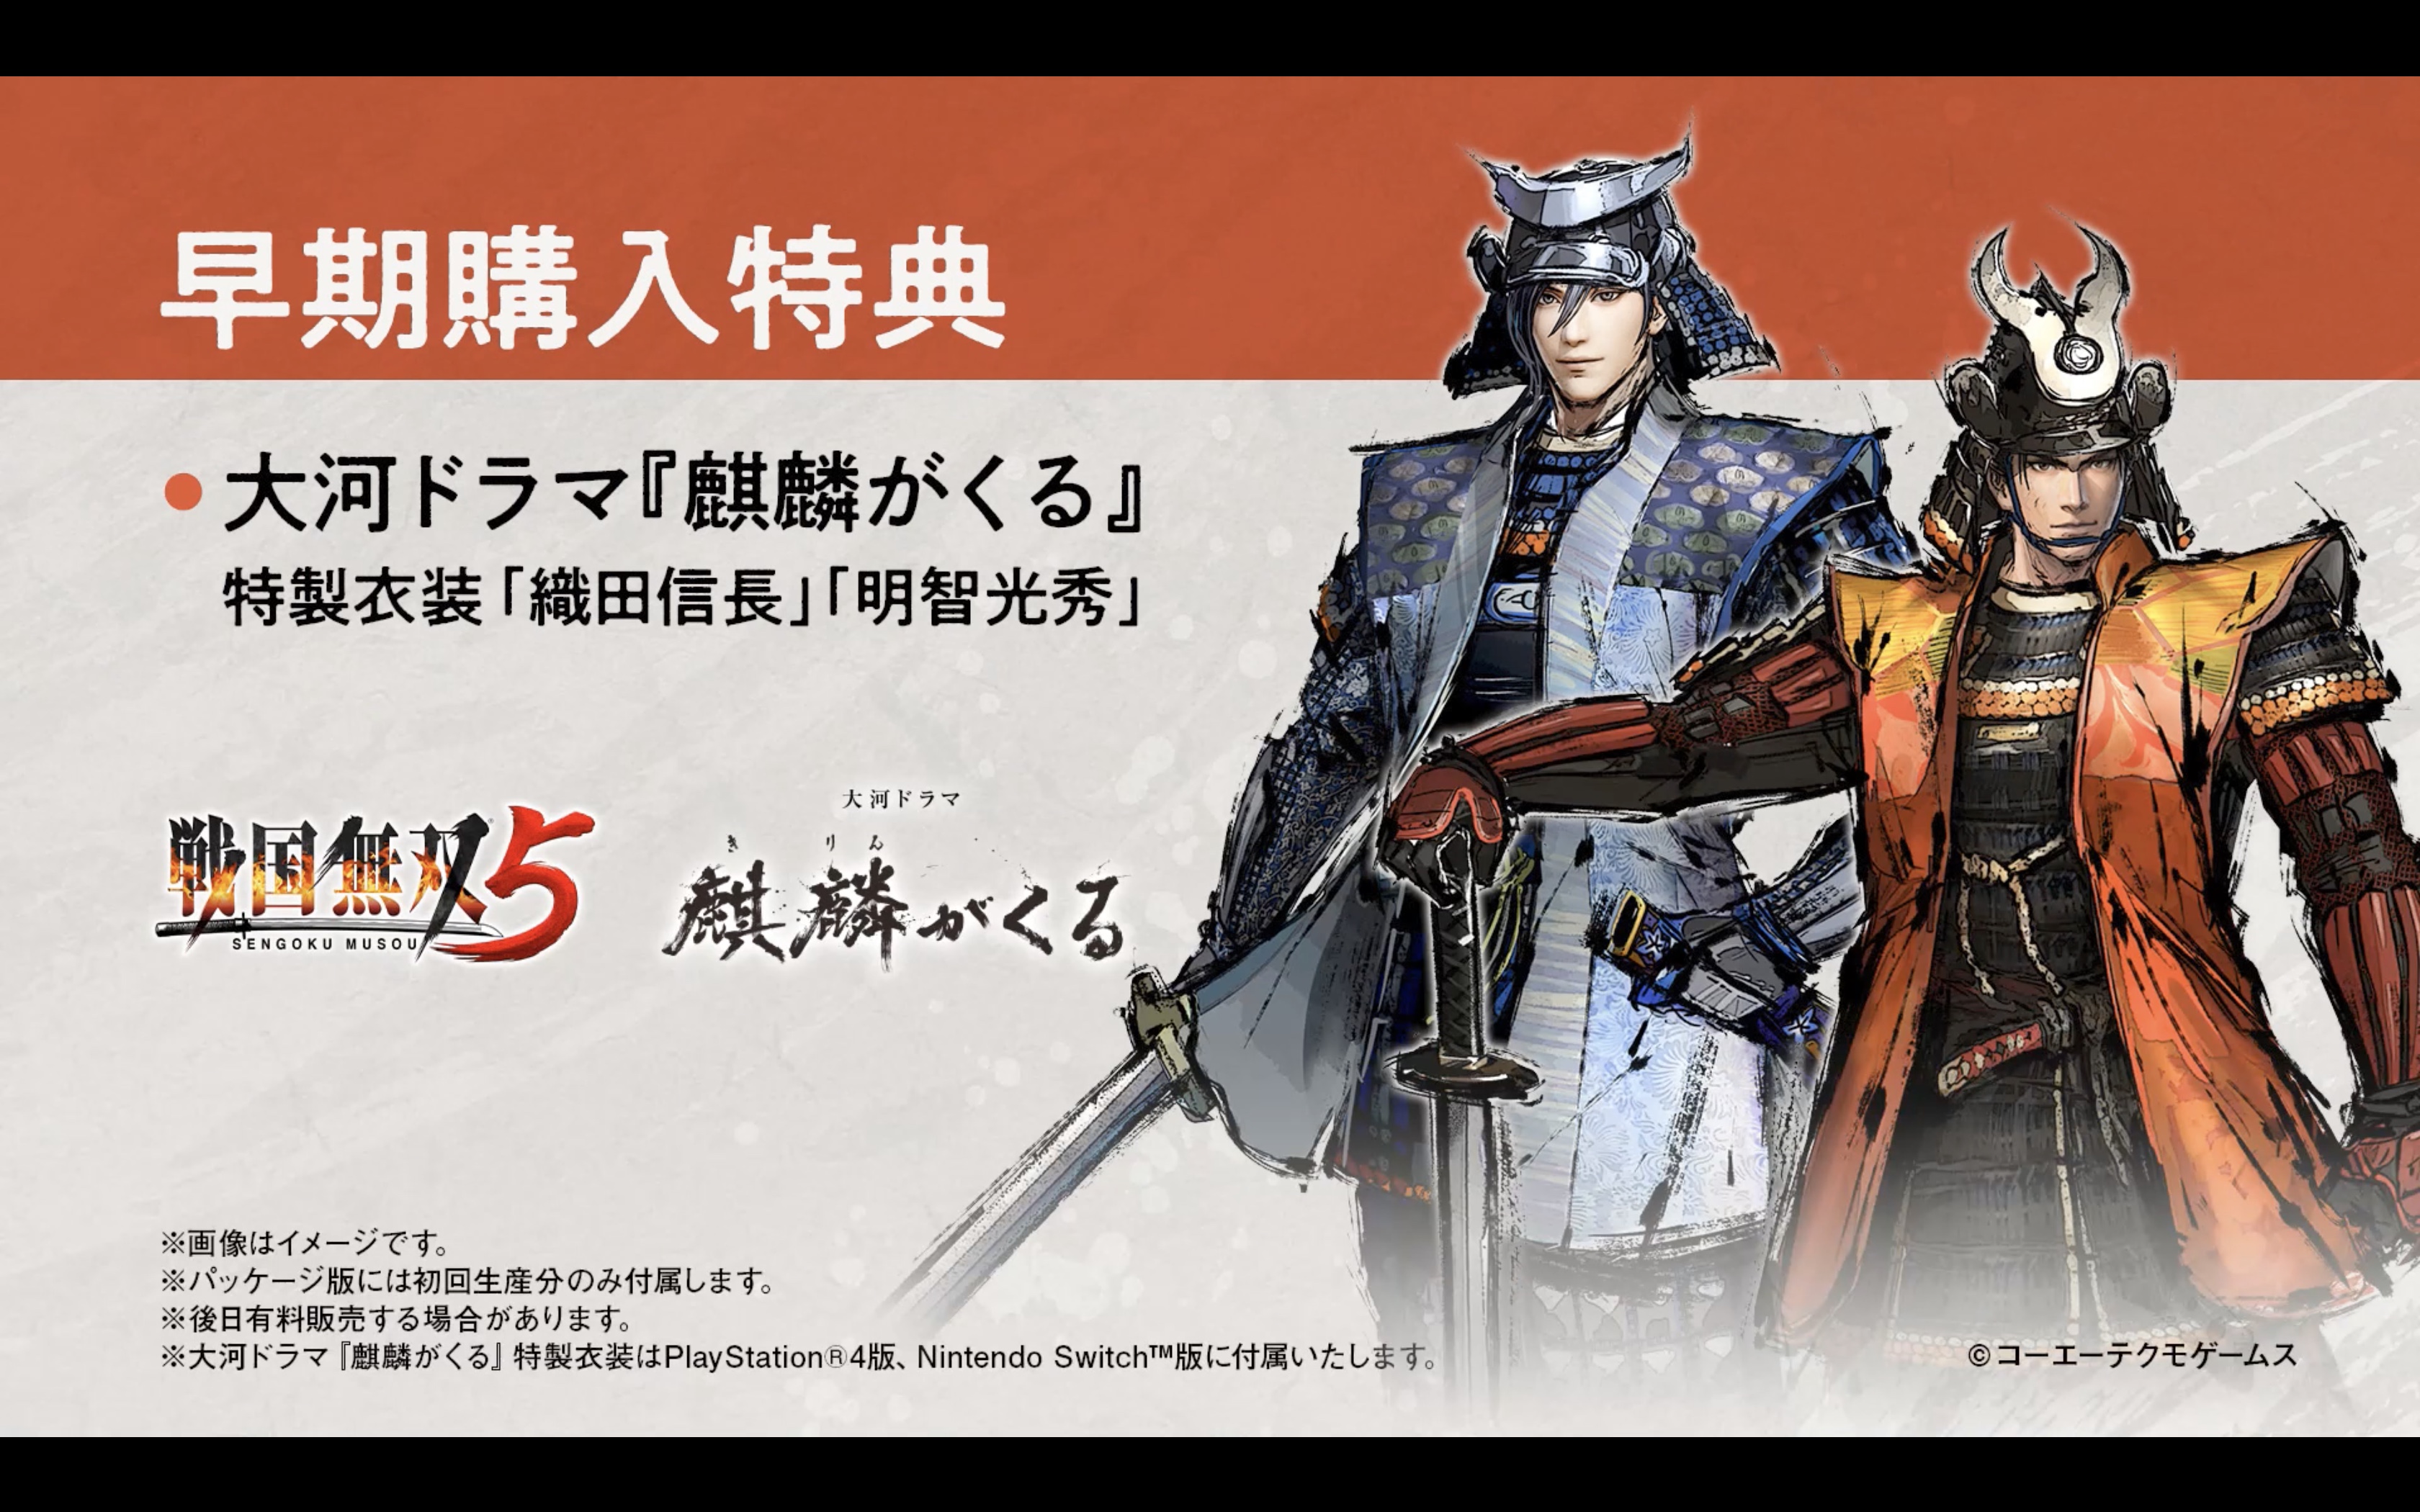 A Lot Of Information Warring States Warriors 5 Will Be Released On June 25th Paudal